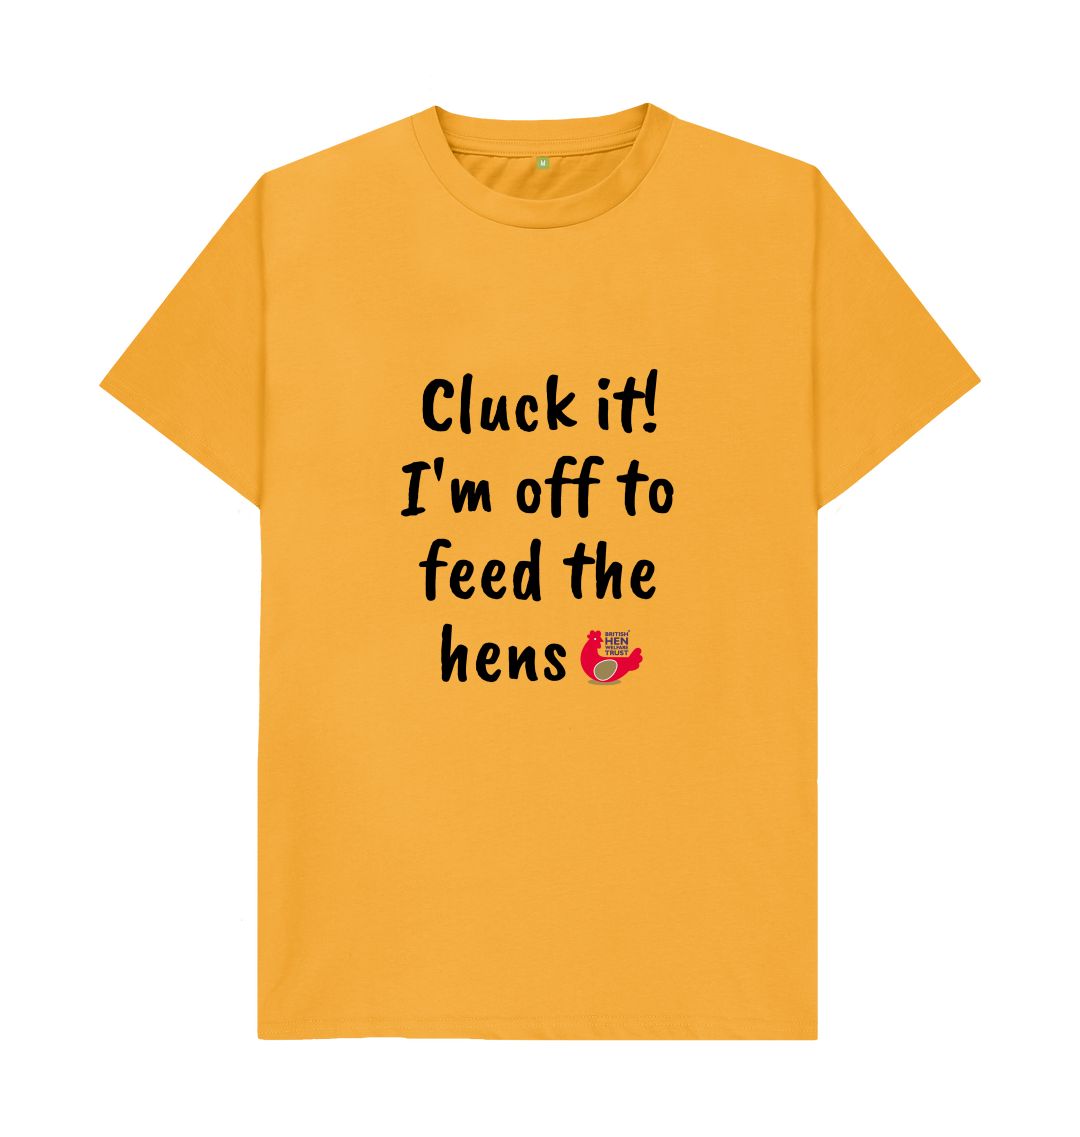 Mustard Cluck it! I'm off to feed the hens Unisex T-shirt